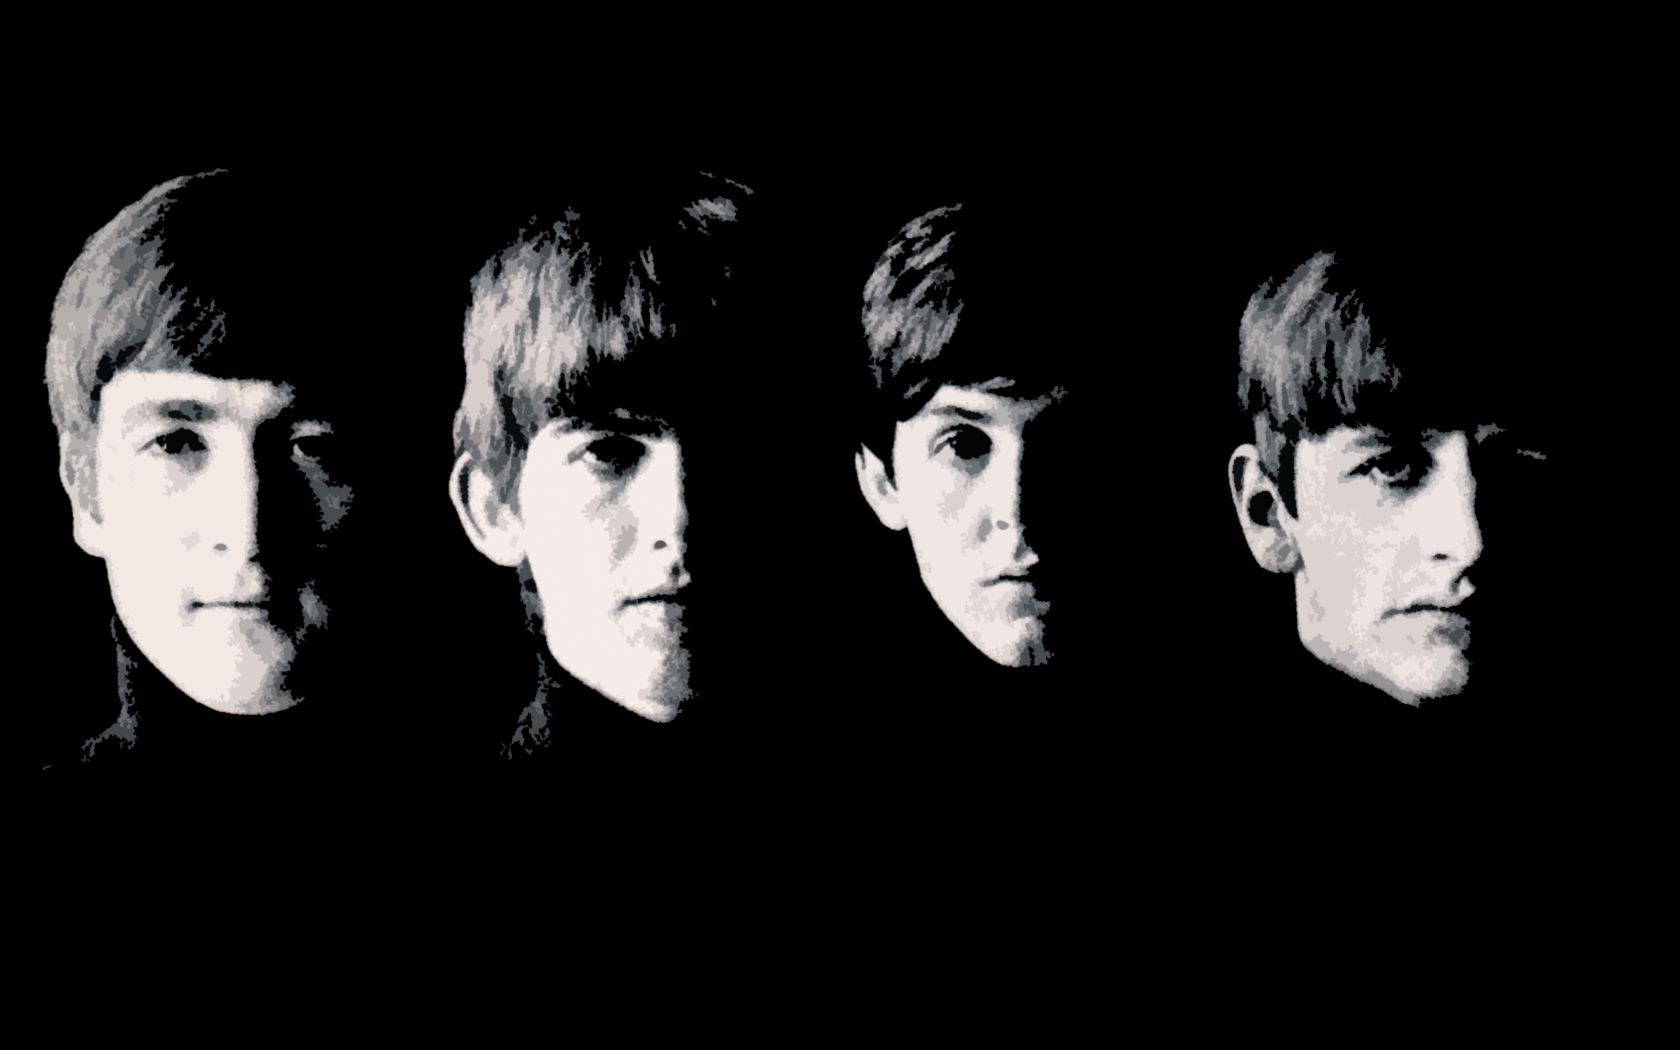 The Beatles Wallpaper Full HD For PC Download 46094 Full HD